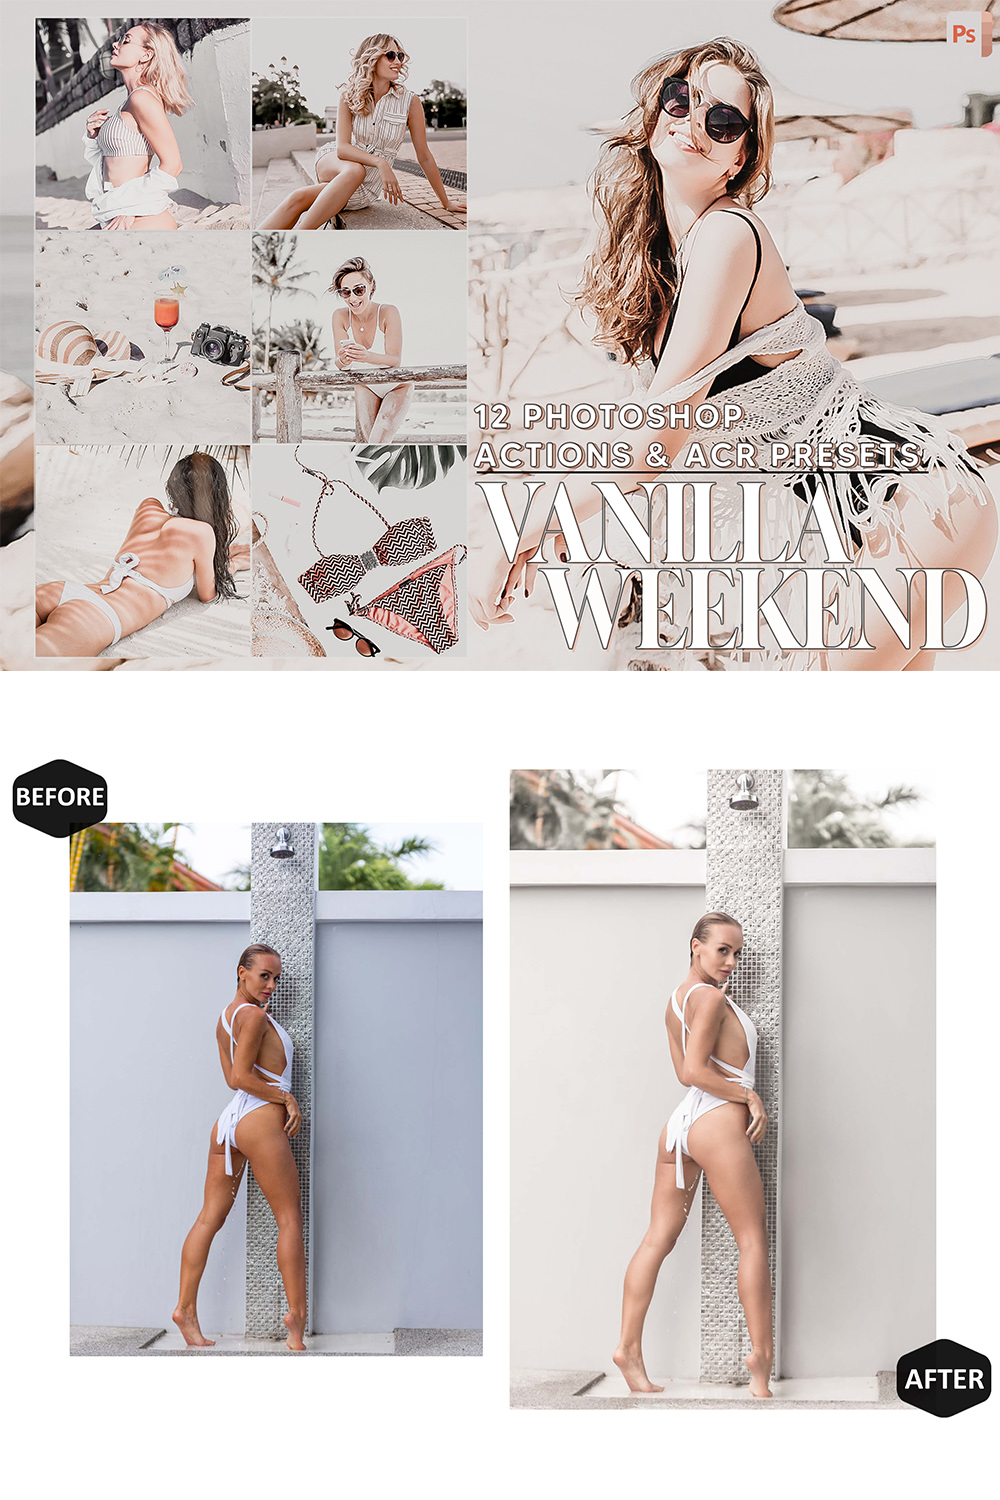 12 Photoshop Actions, Vanilla Weekend Ps Action, Creamy ACR Preset, Luxury Ps Filter, Atn Portrait And Lifestyle Theme For Instagram Blogger pinterest preview image.